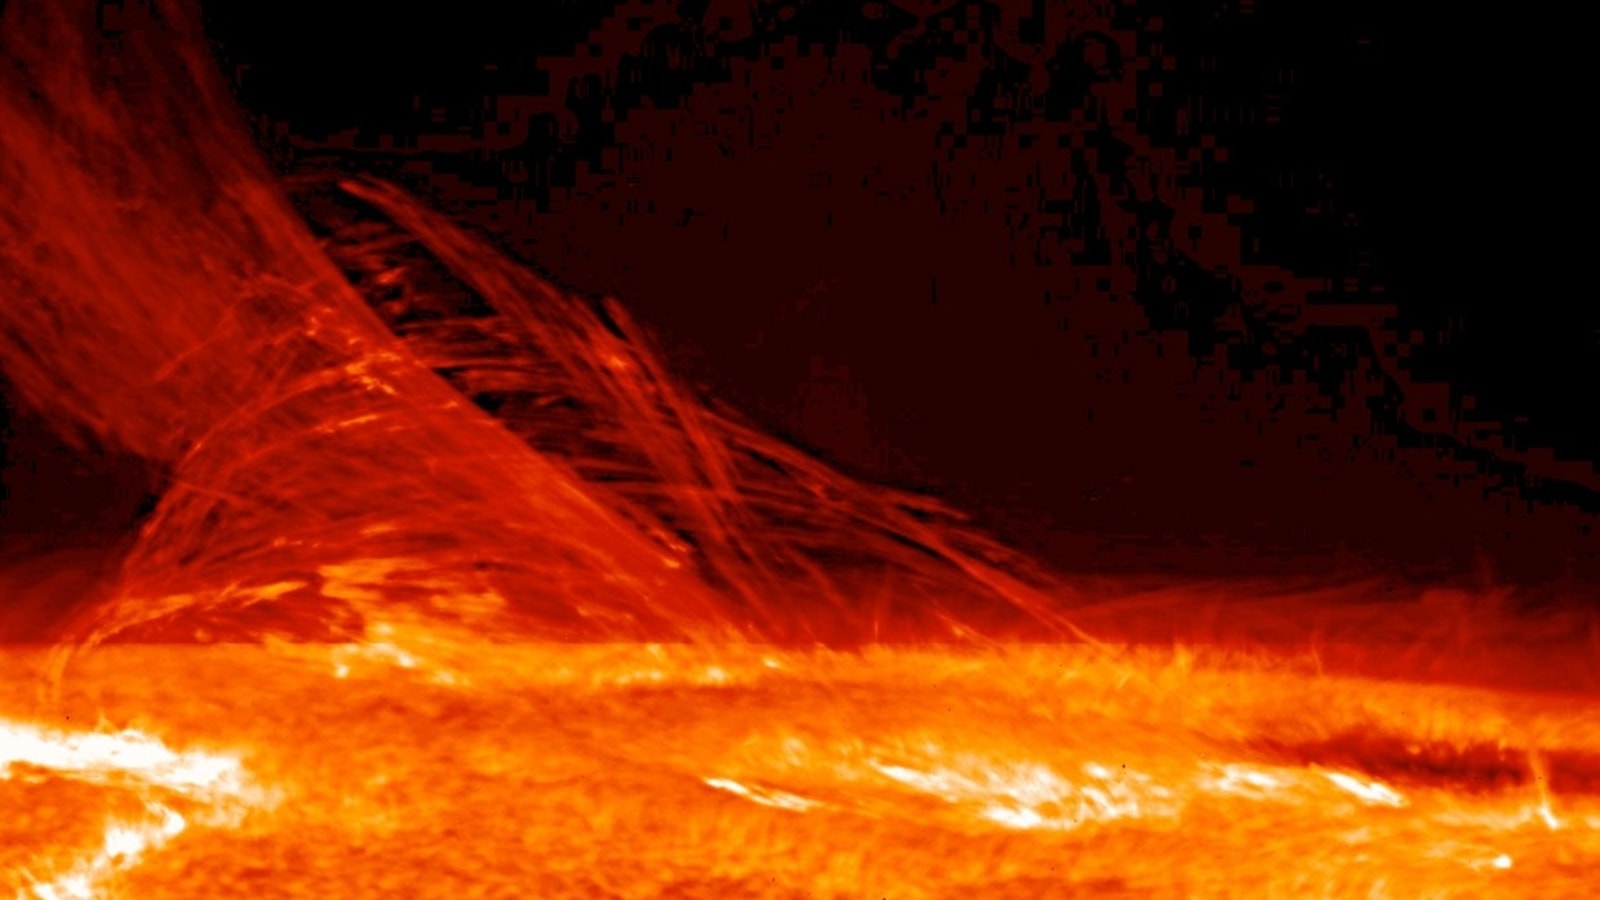 Sunspot crackling with solar flares spells solar storm trouble on Earth; blackouts span globe